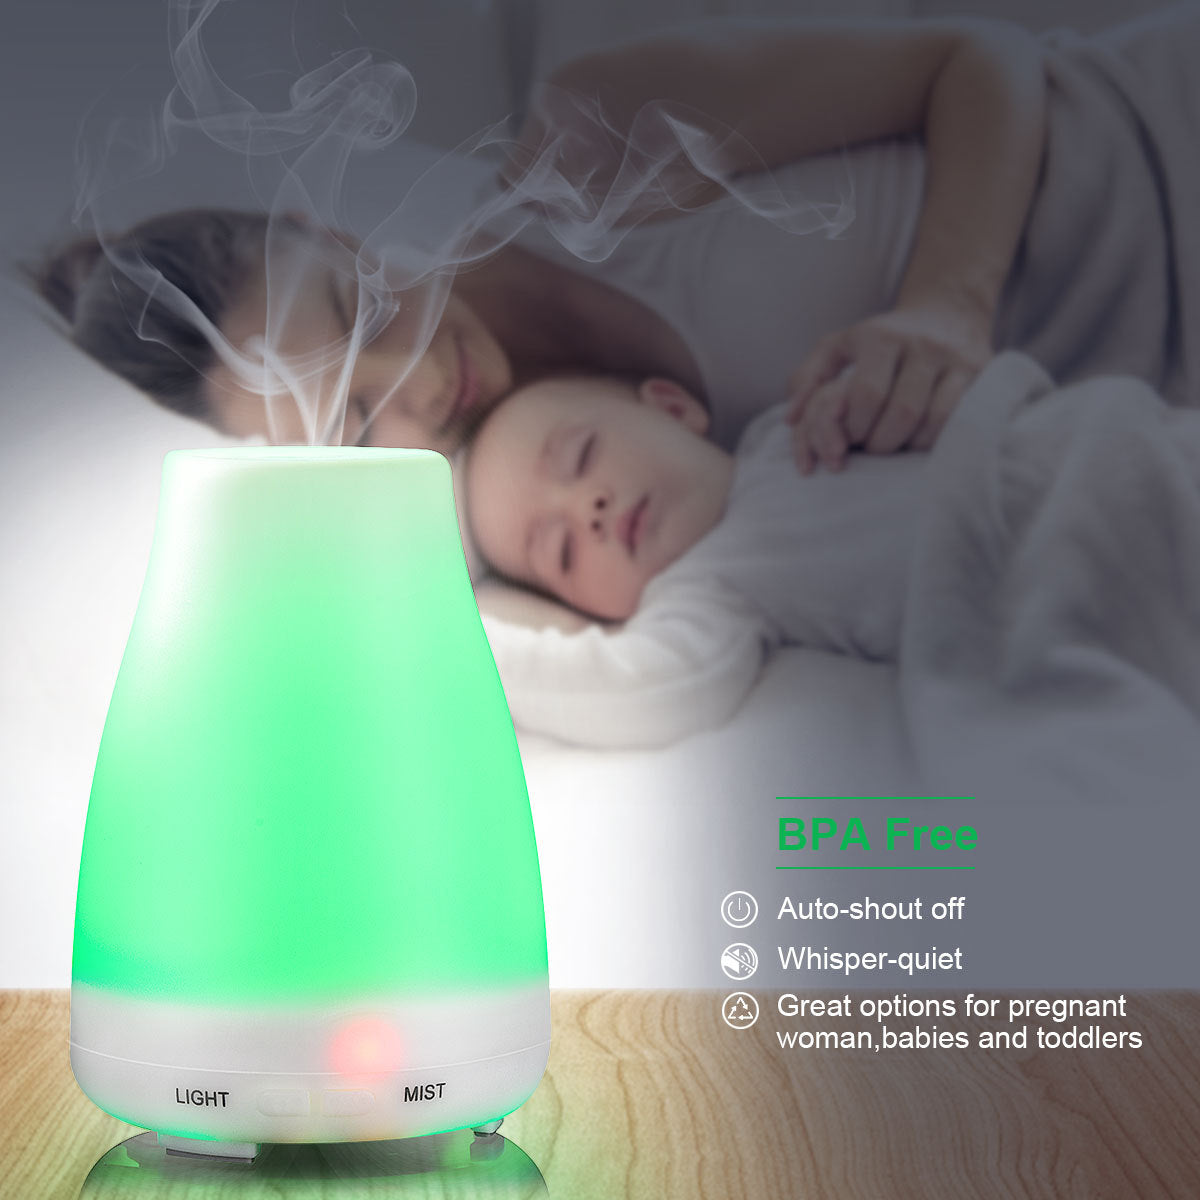 100ML Diffusers for Essential Oils Aromatherapy Diffuser Cool Mist Humidifier with 7 Colors LED Lights for Home Office Room